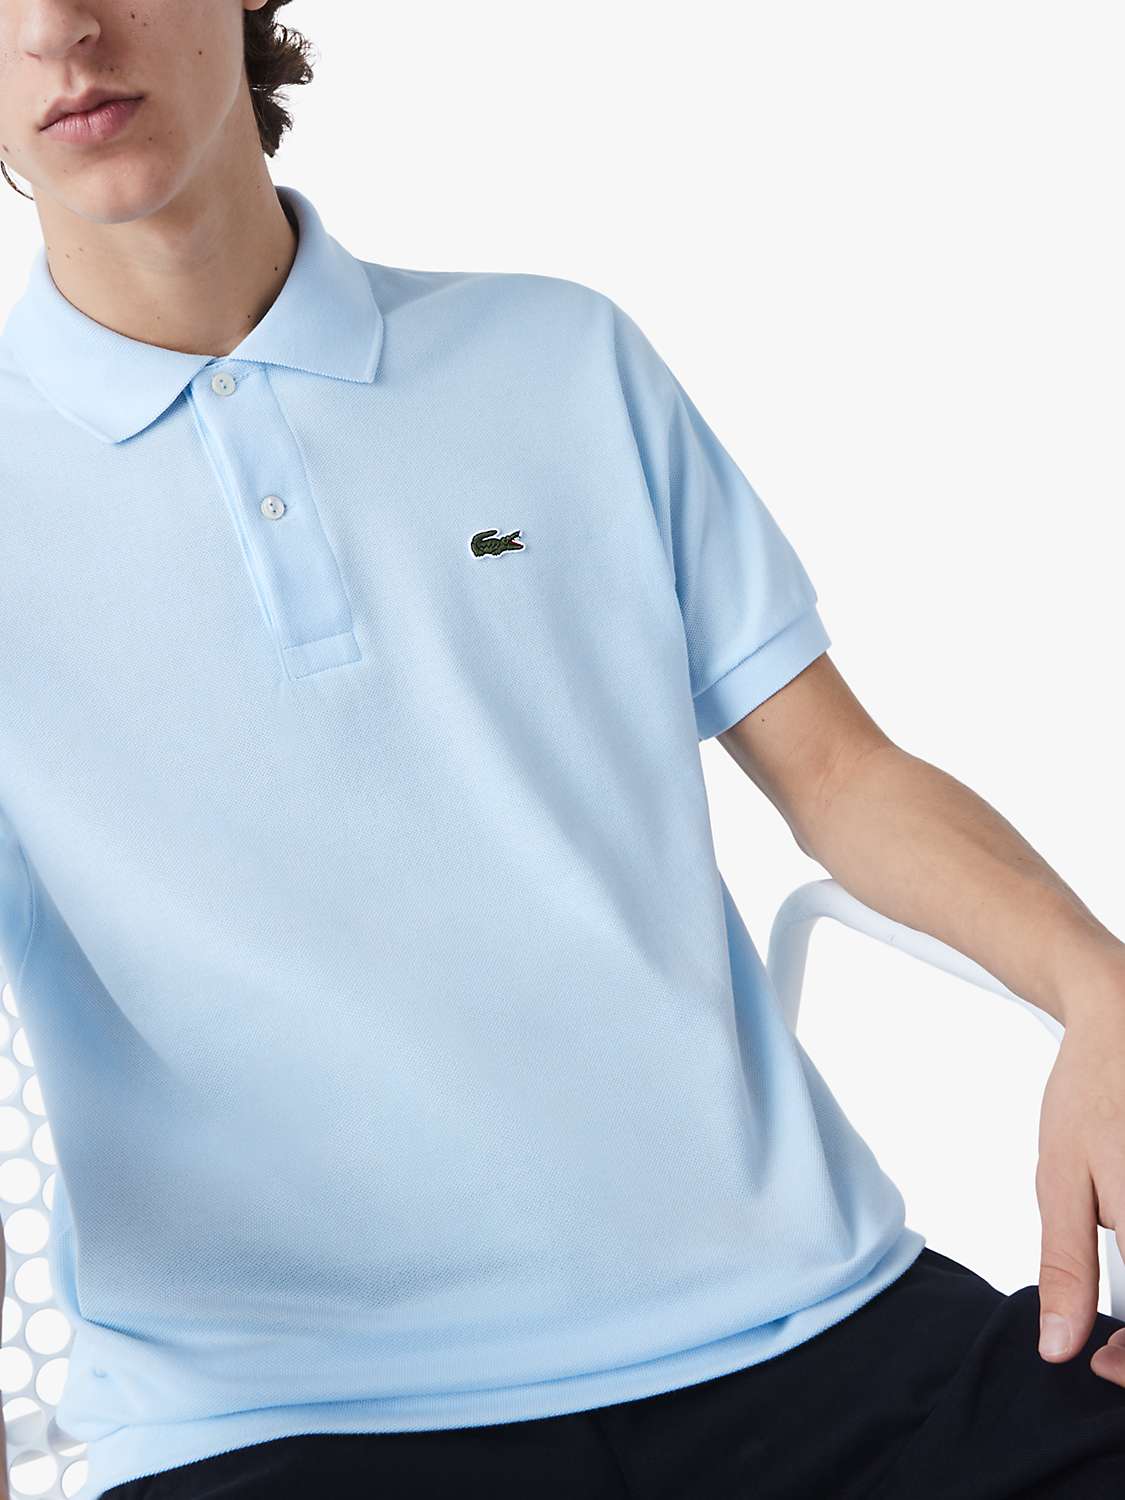 Buy Lacoste Classic Fit Logo Polo Shirt Online at johnlewis.com